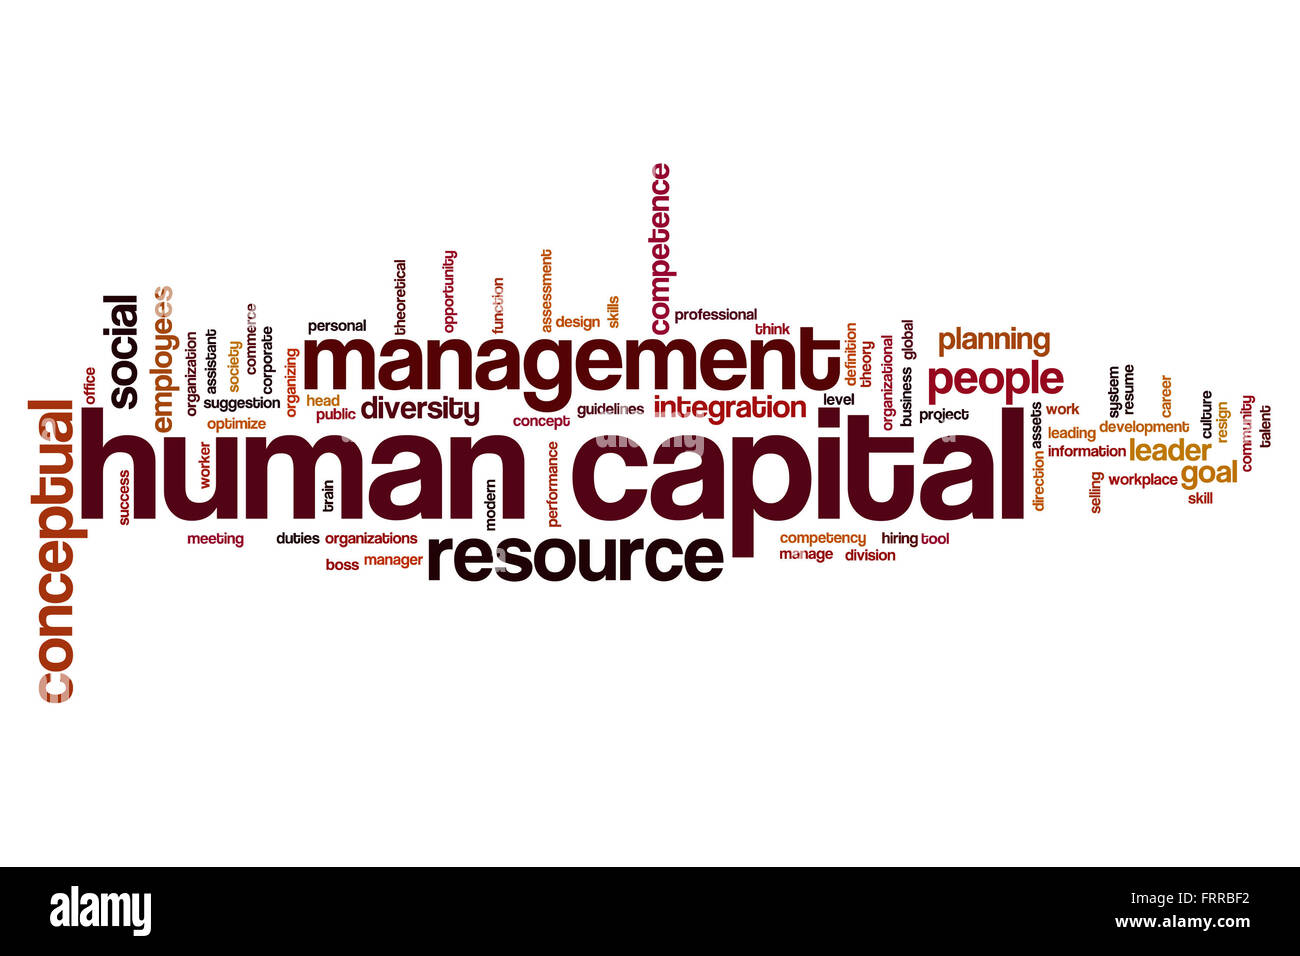 Human capital concept word cloud background Stock Photo